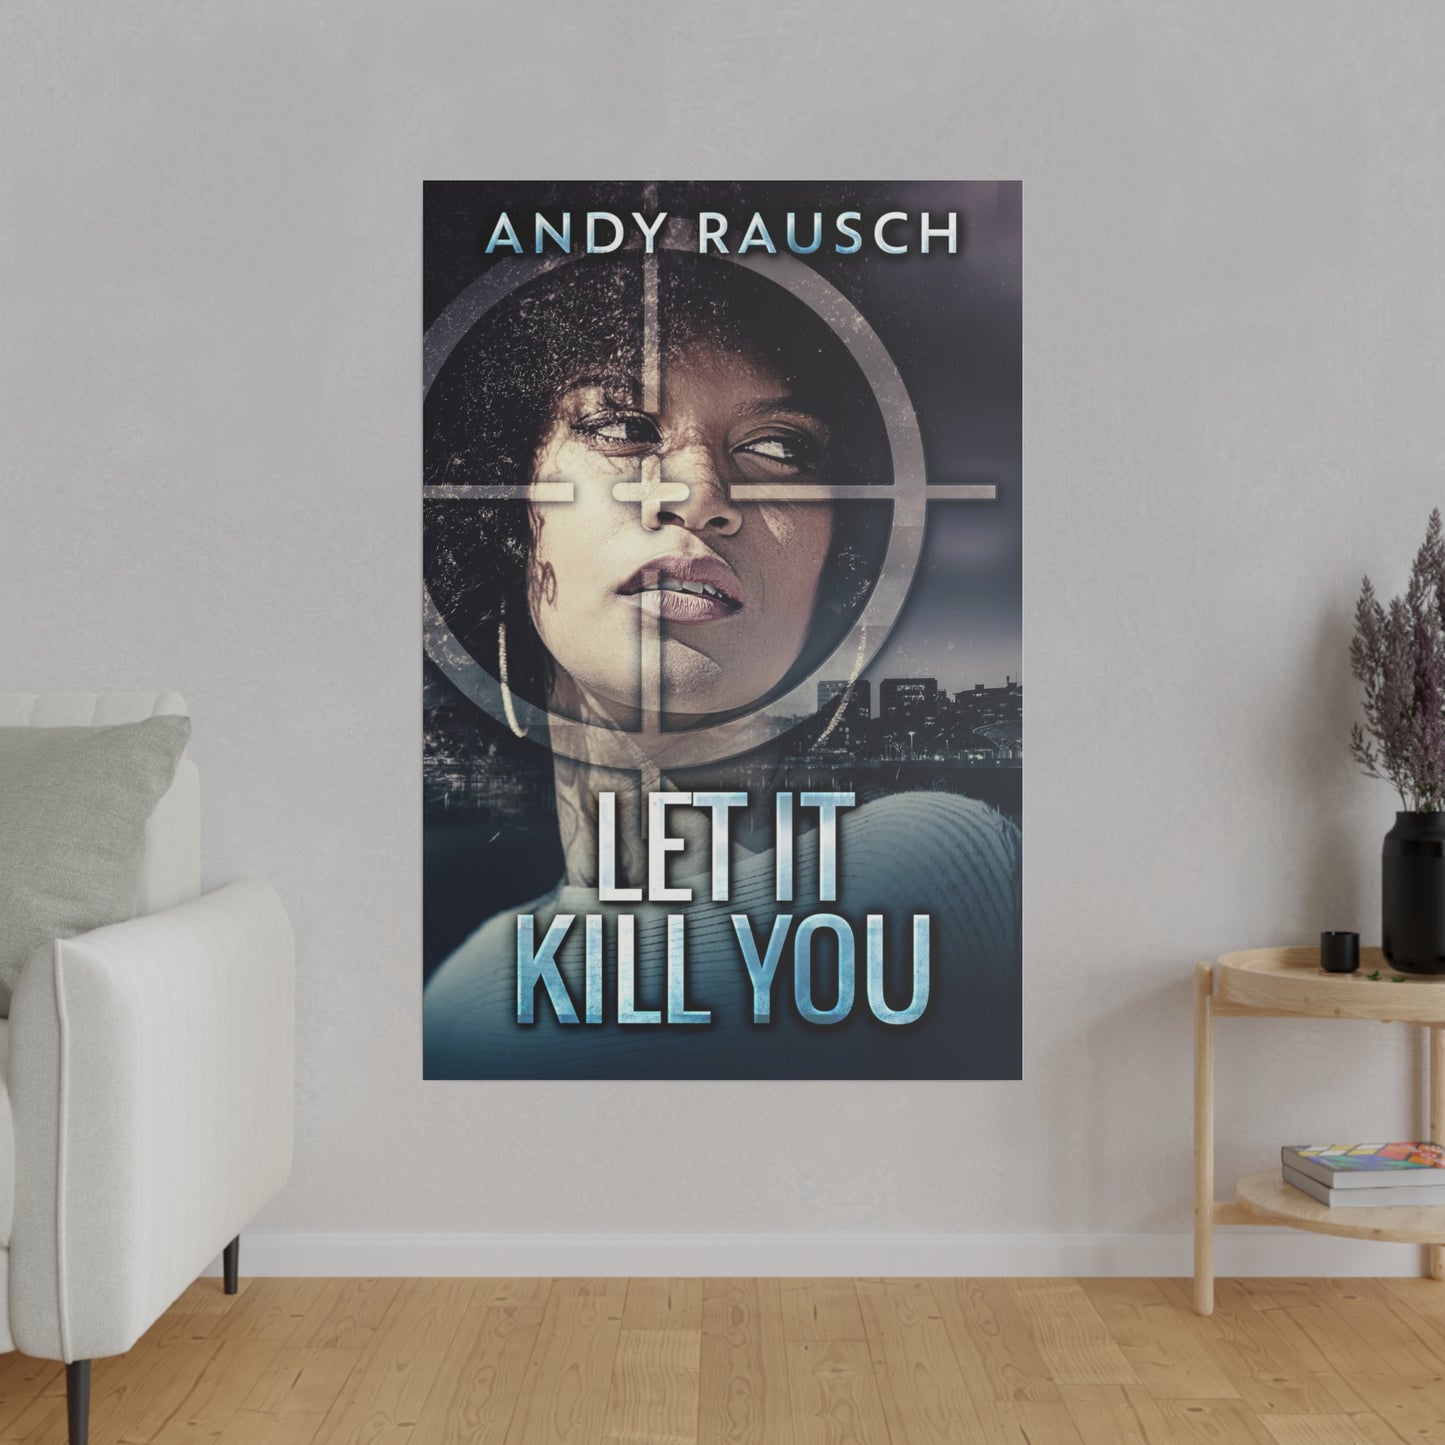 Let It Kill You - Canvas